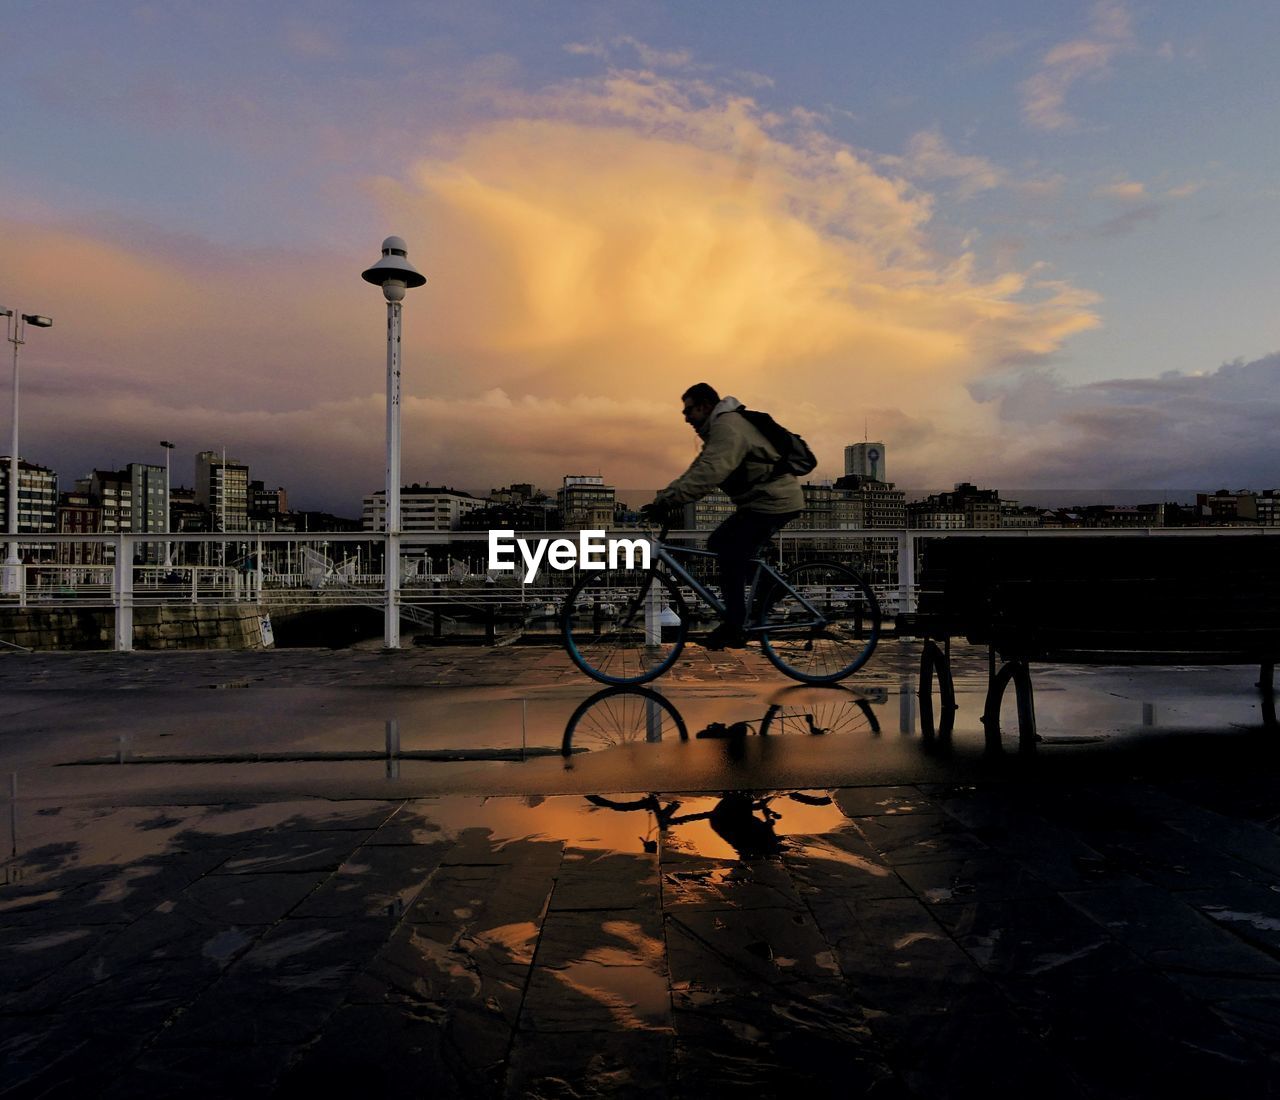 Man riding bicycle on street against sky during sunset